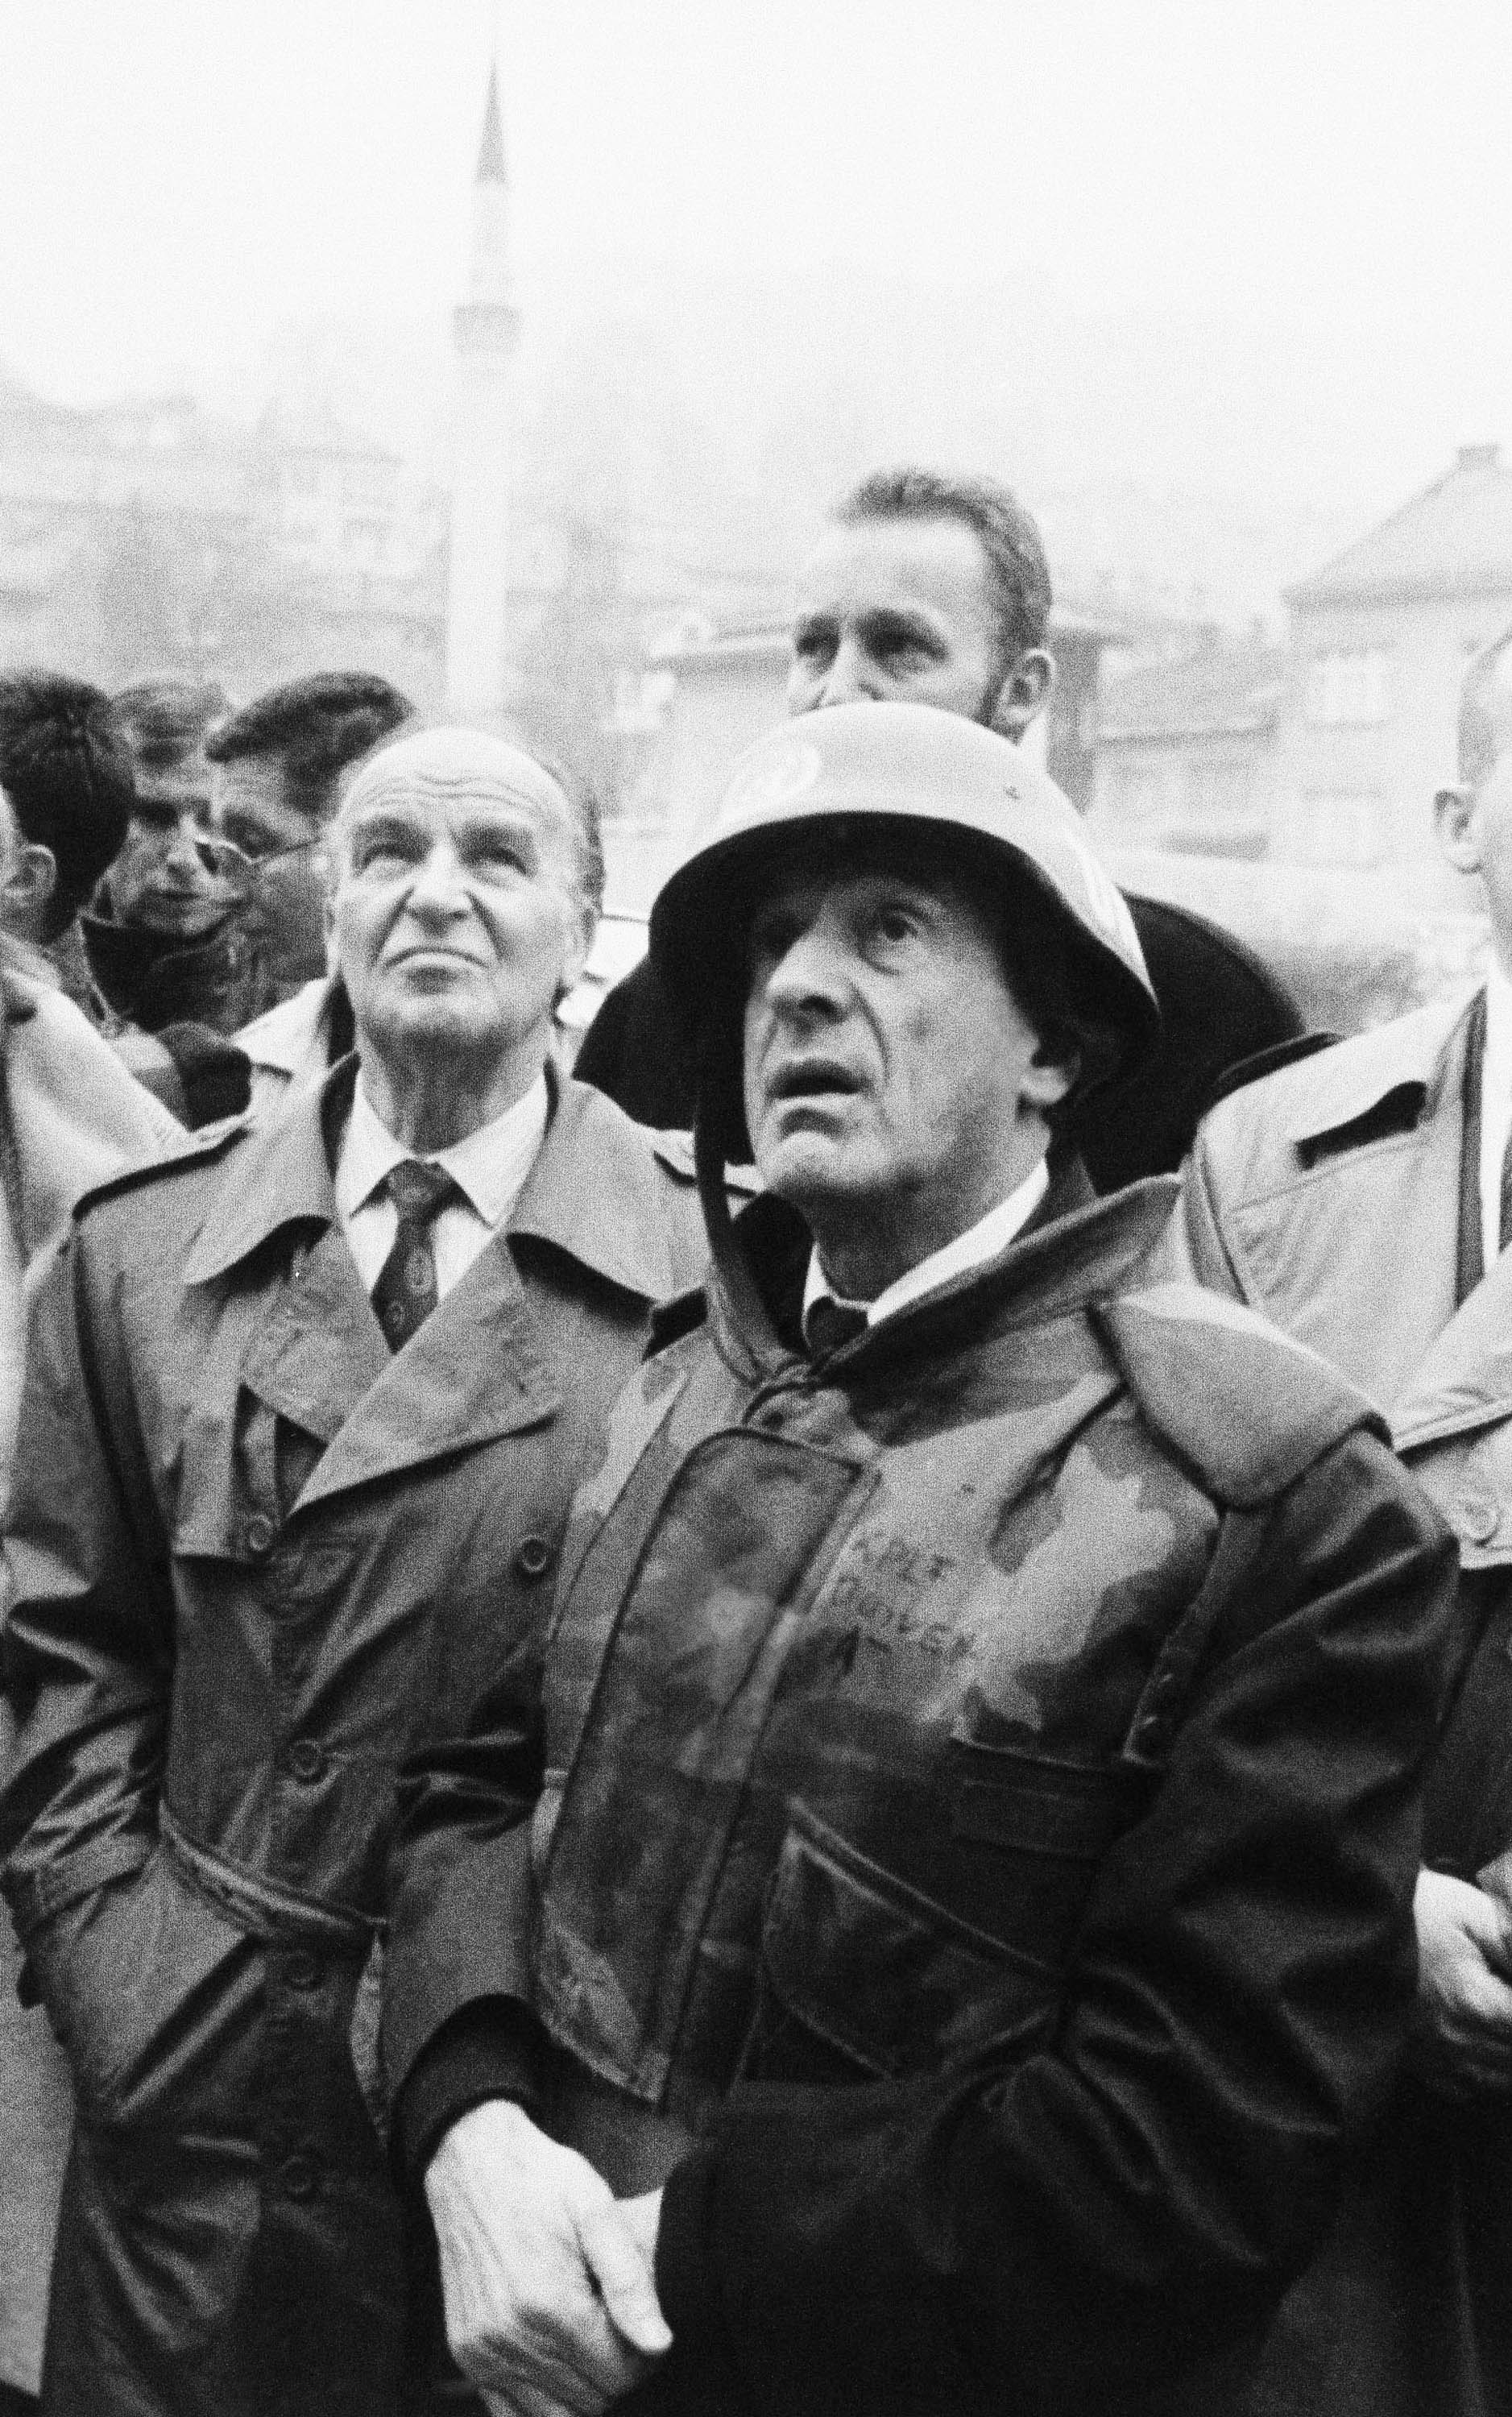 Nobel Peace Prize winner Elie Wiesel, right, and Bosnian President Ali Ja Izetbegovic, left, look at war-torn ruins in the old part of Sarajevo, Bosnia and Herzegovina on Nov. 29, 1992. Wiesel, seen here wearing a U.N. peacekeeping force helmet and flak jacket, was making a four-day tour of the war zone.